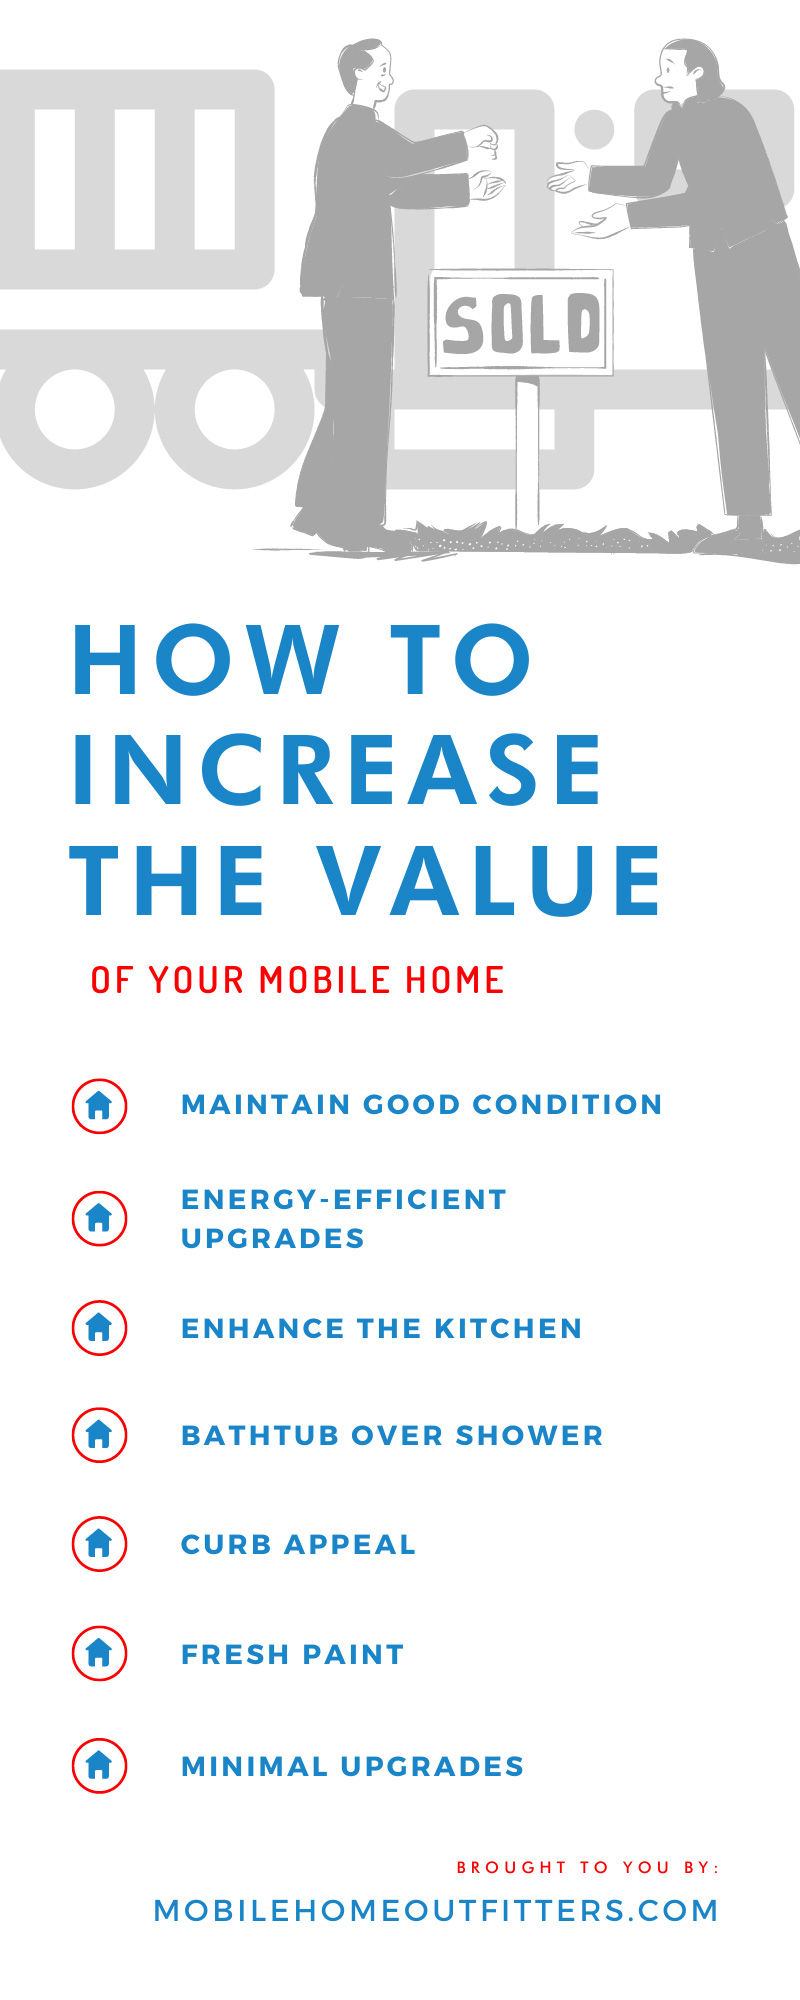 How To Increase the Value of Your Mobile Home